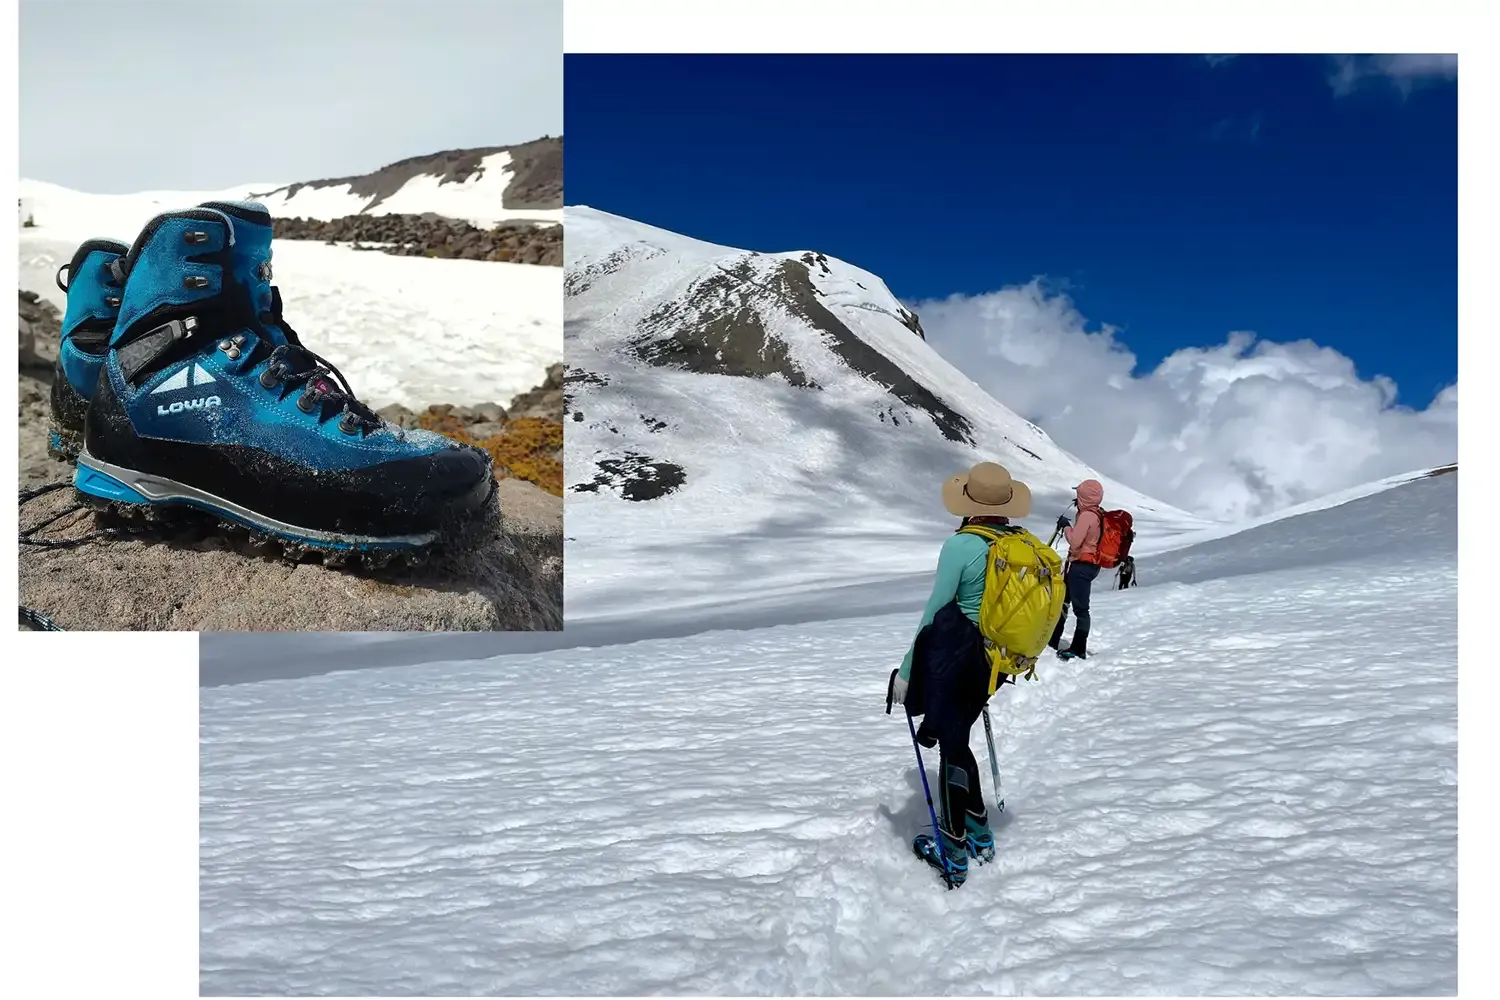 two photos: left of Alpine Expert GTX womens and right of and friends taking a break in a snowy landscape